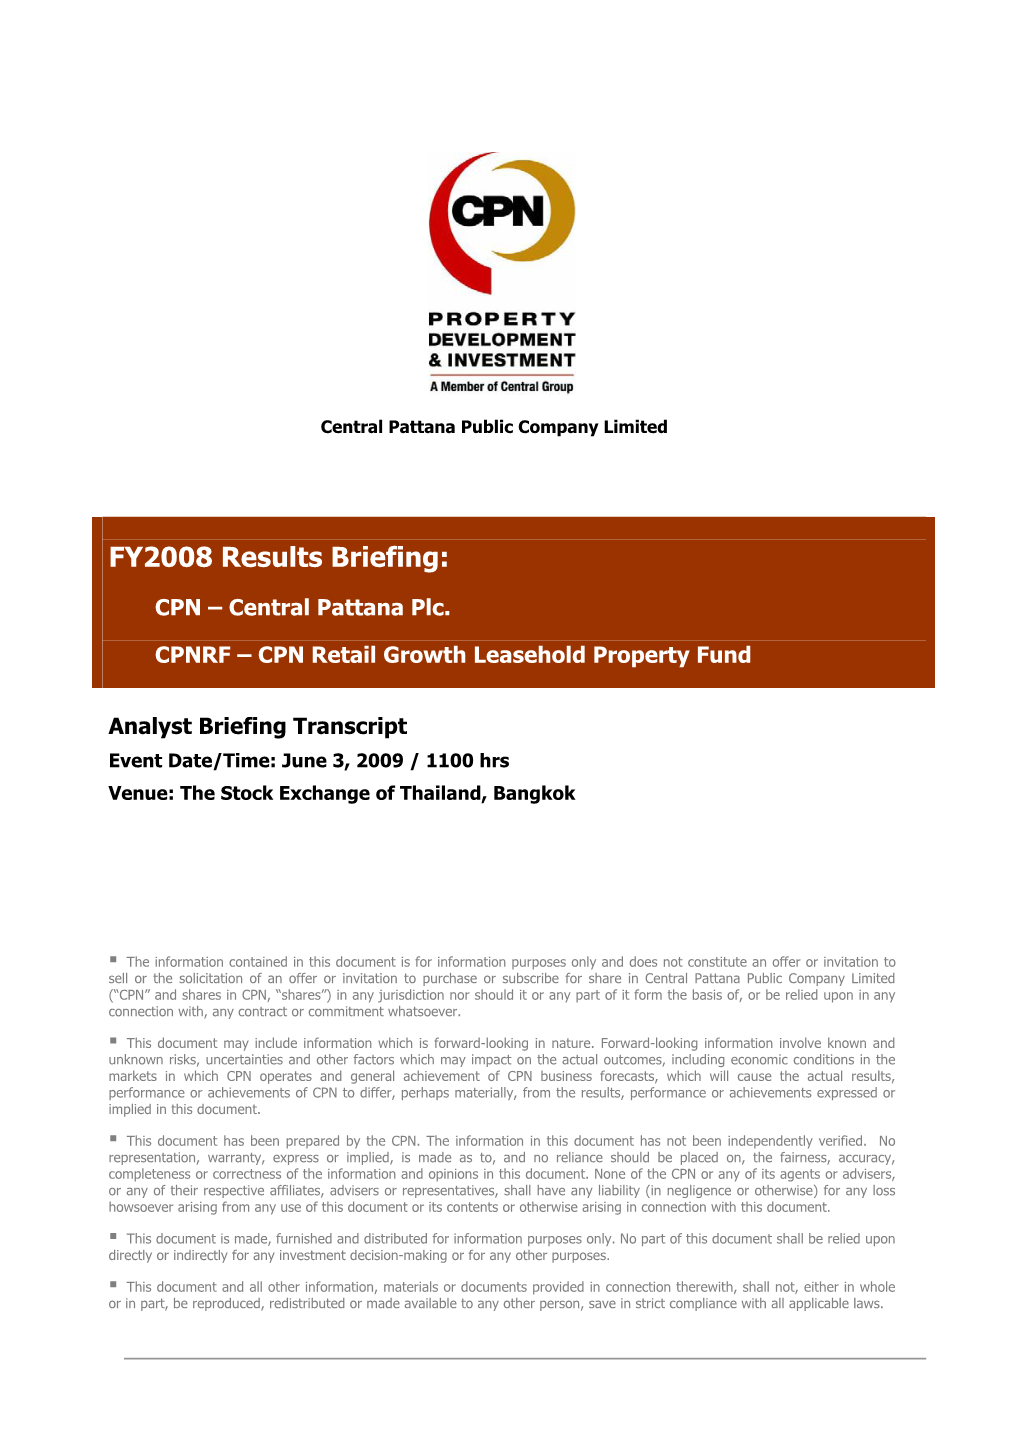 FY2008 Results Briefing